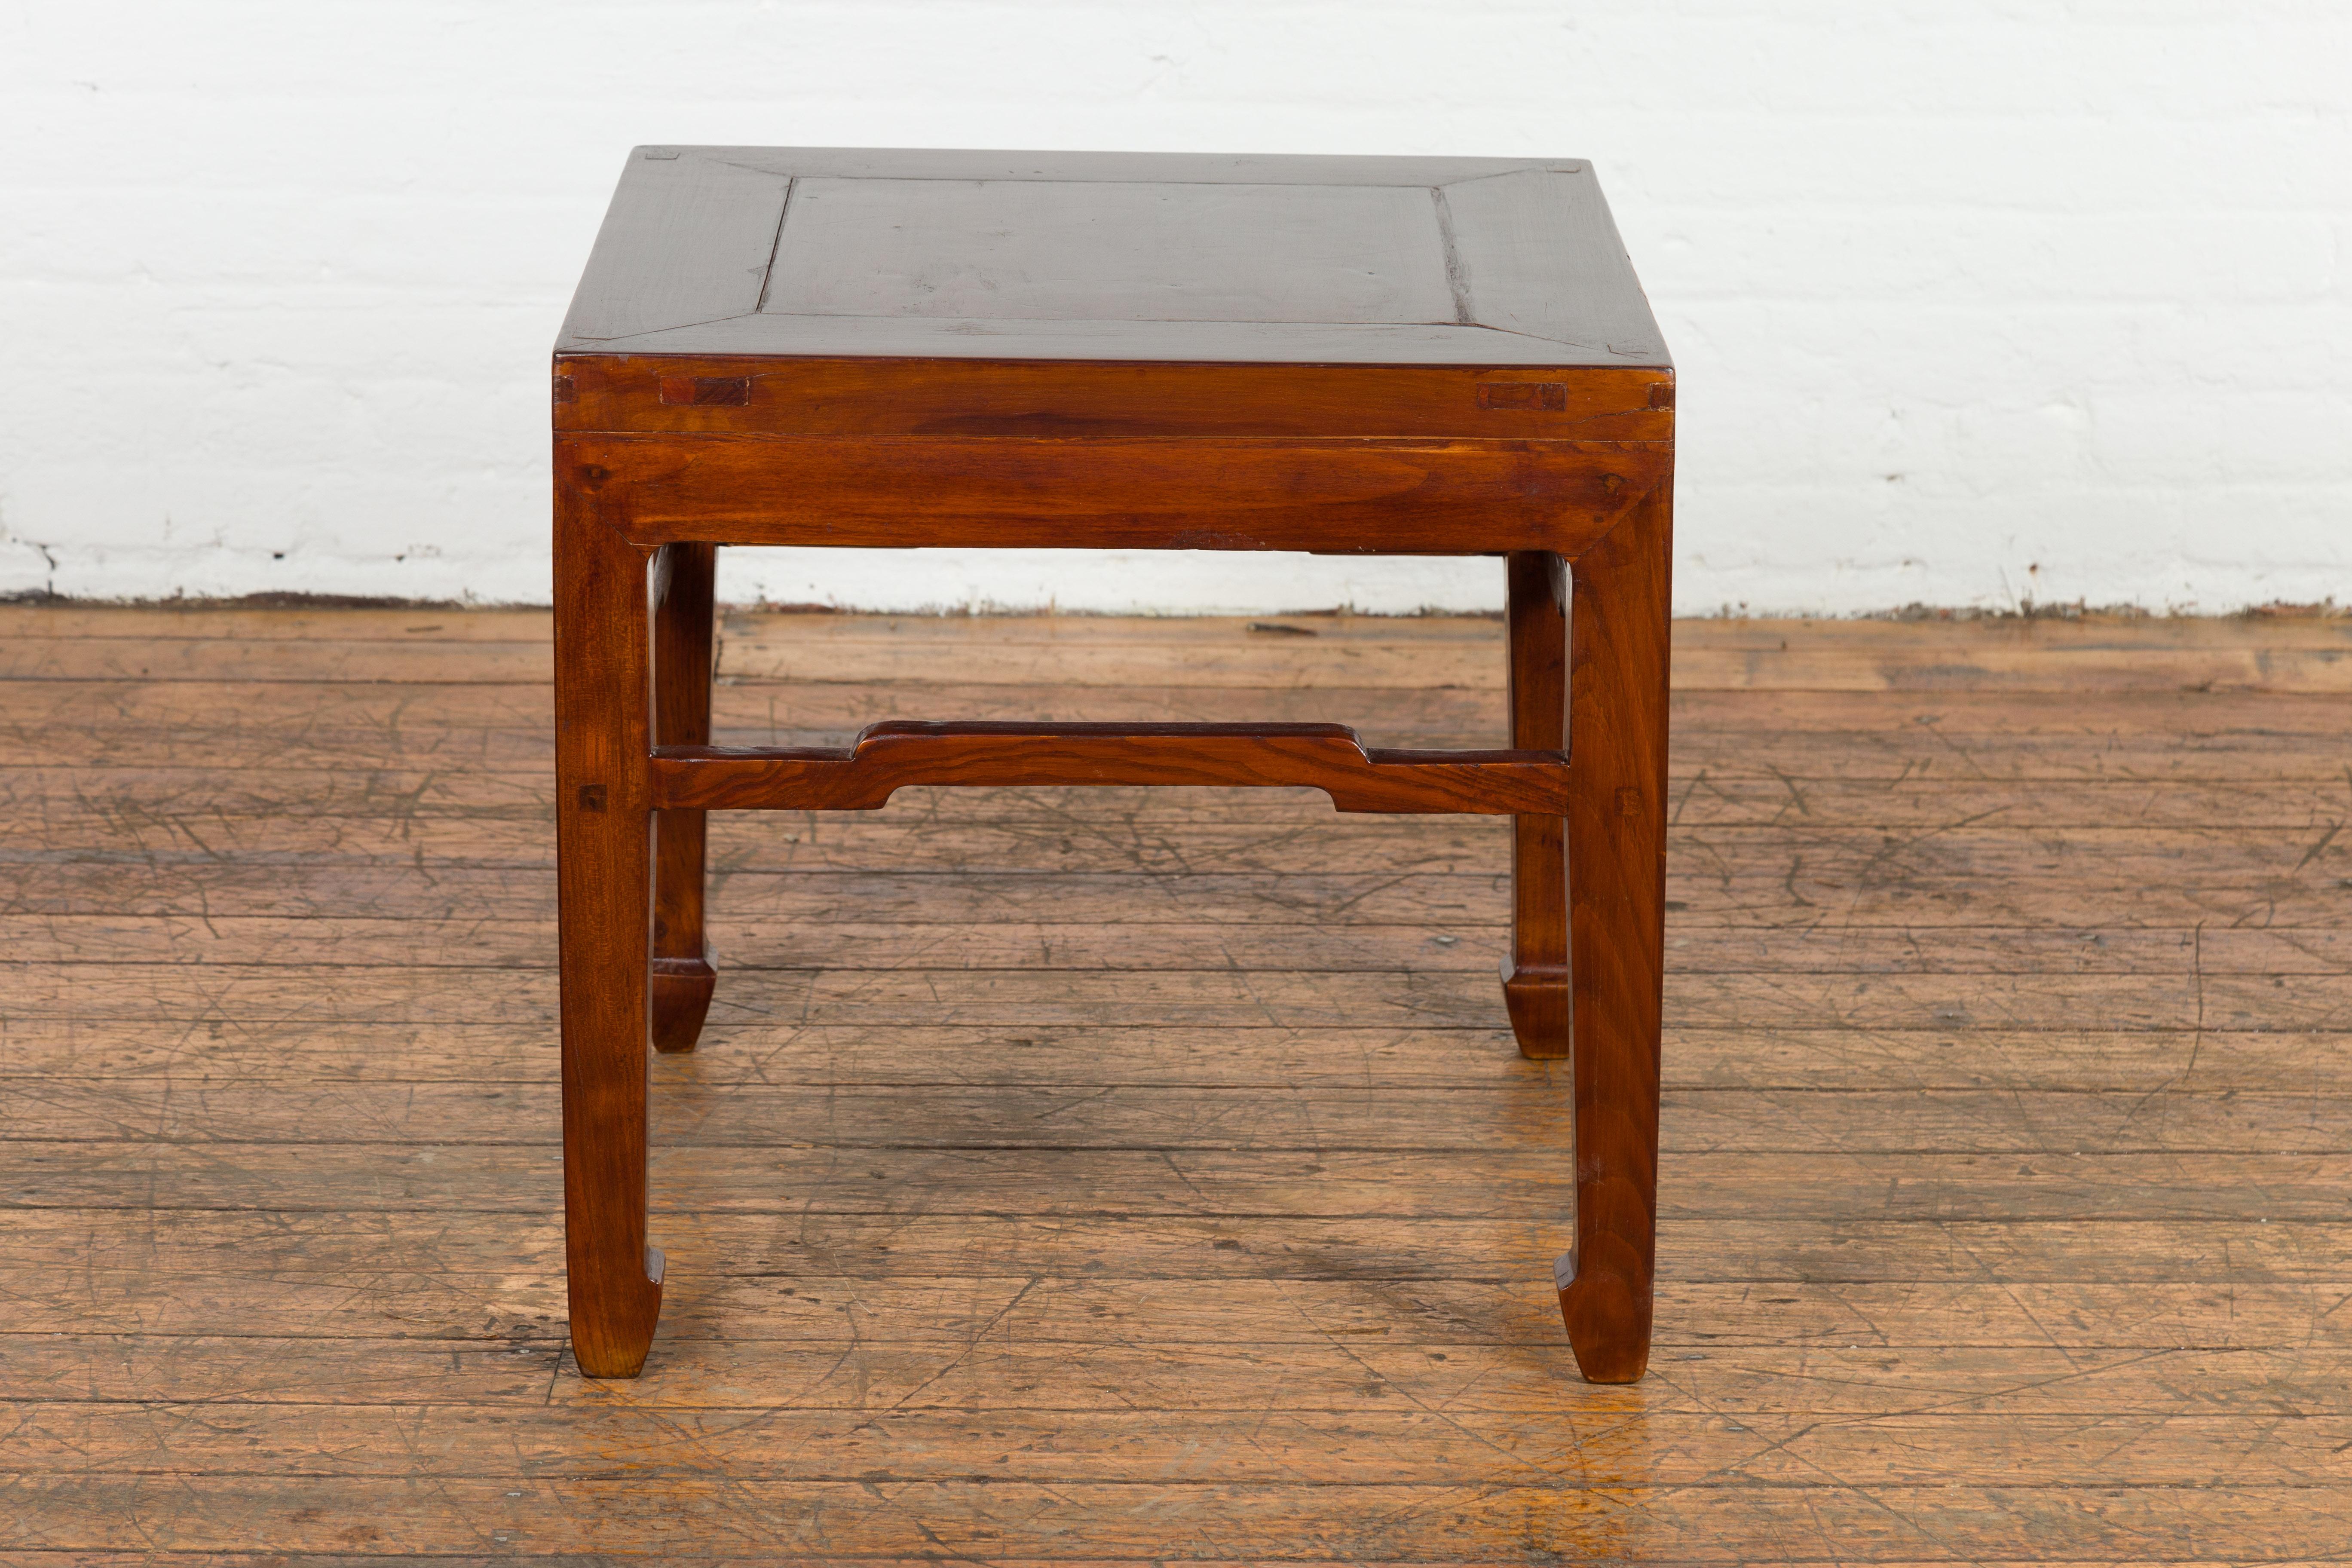 Chinese Qing Dynasty Period 19th Century Side Table with Humpback Stretchers For Sale 9